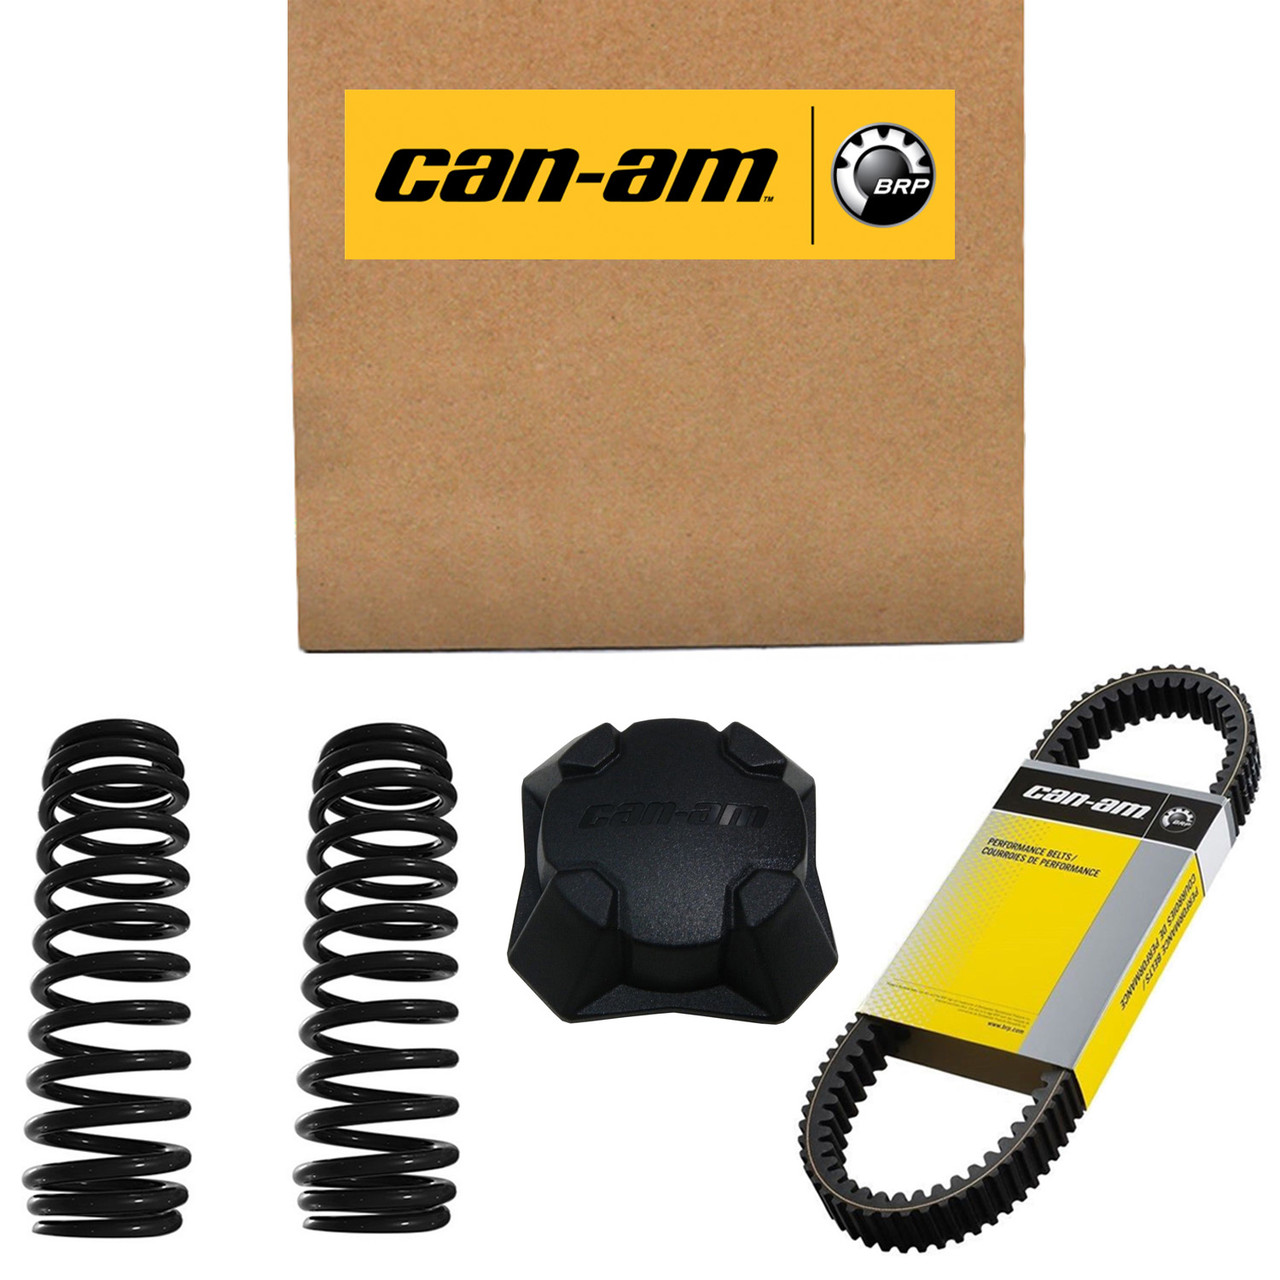 Can-Am New OEM Chain Guide, 420236584